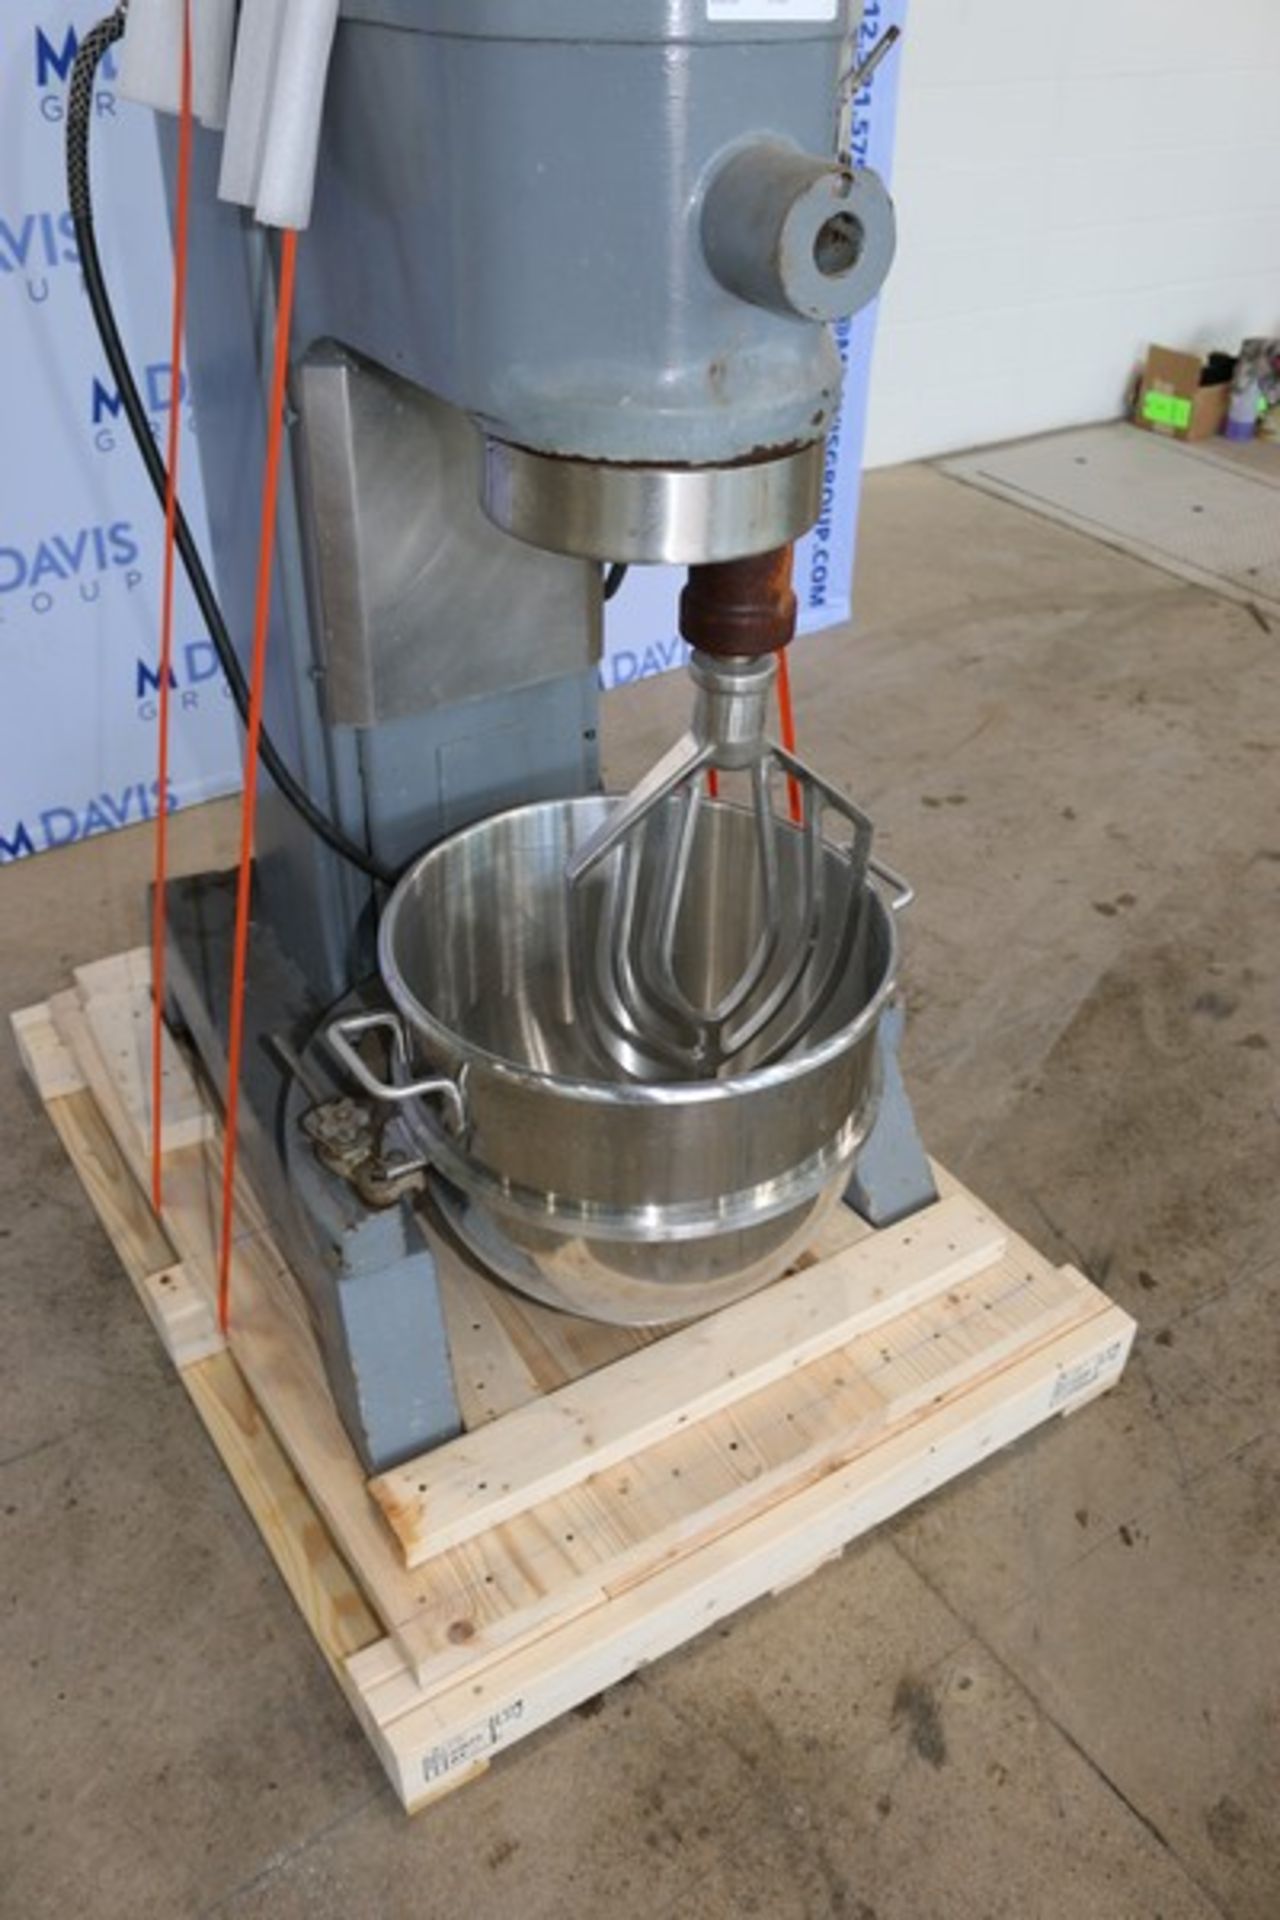 Hobrt Mixer, M/N L-800, S/N 11-213-617, 200 Volts, 1725 RPM Motor, with 1-1/2 hp Motor, with S/S - Image 3 of 6